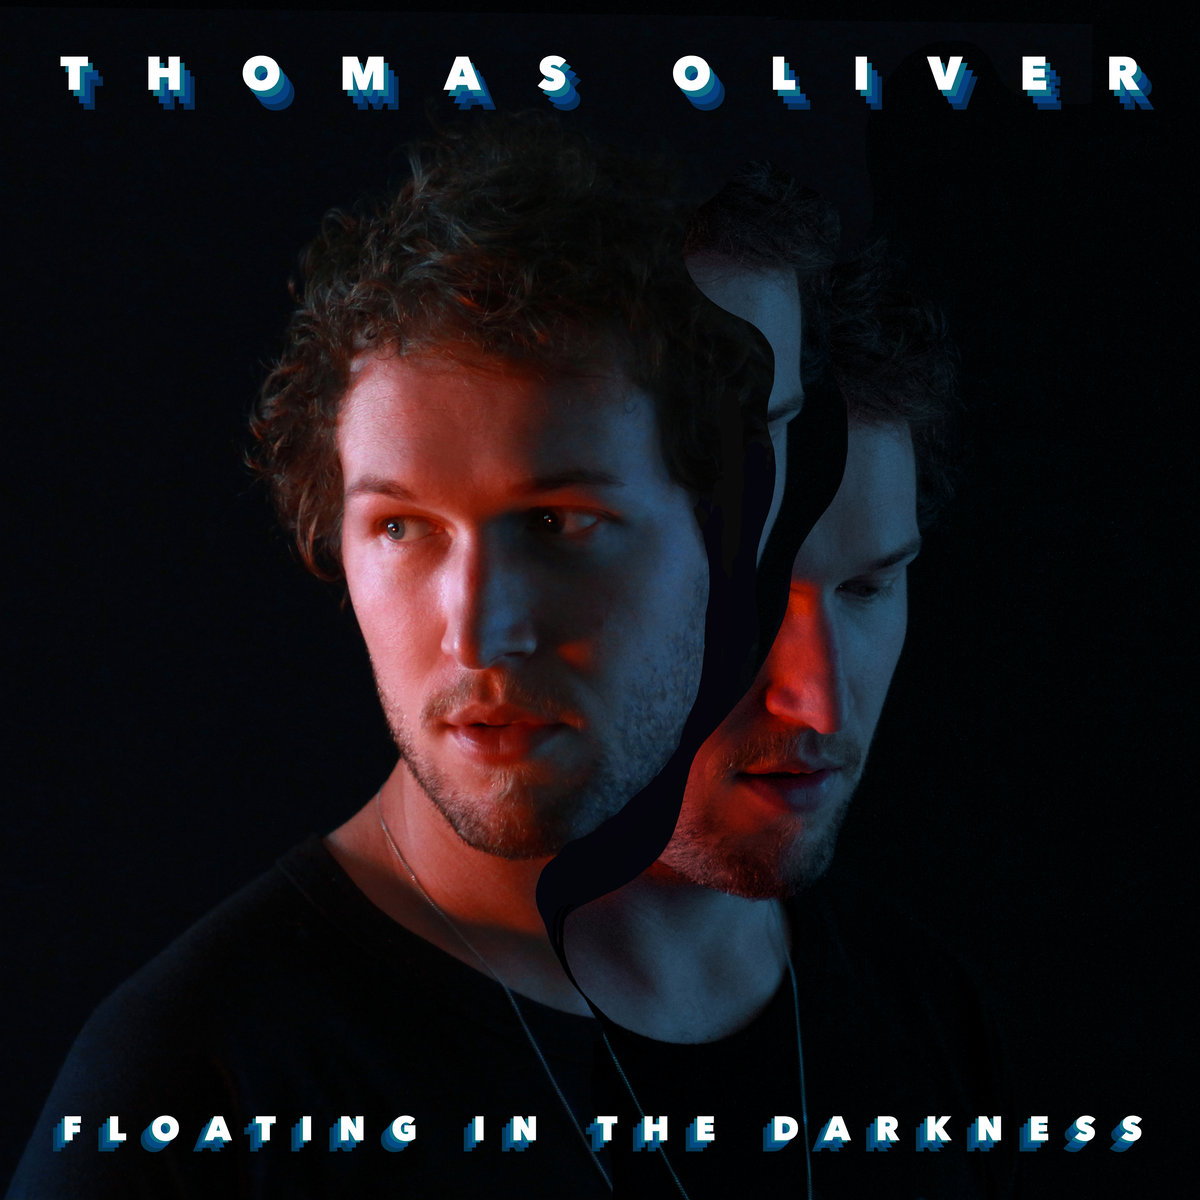 Thomas Oliver – “Floating In The Darkness” [Saxophone Overdubs Recorded (AP)]